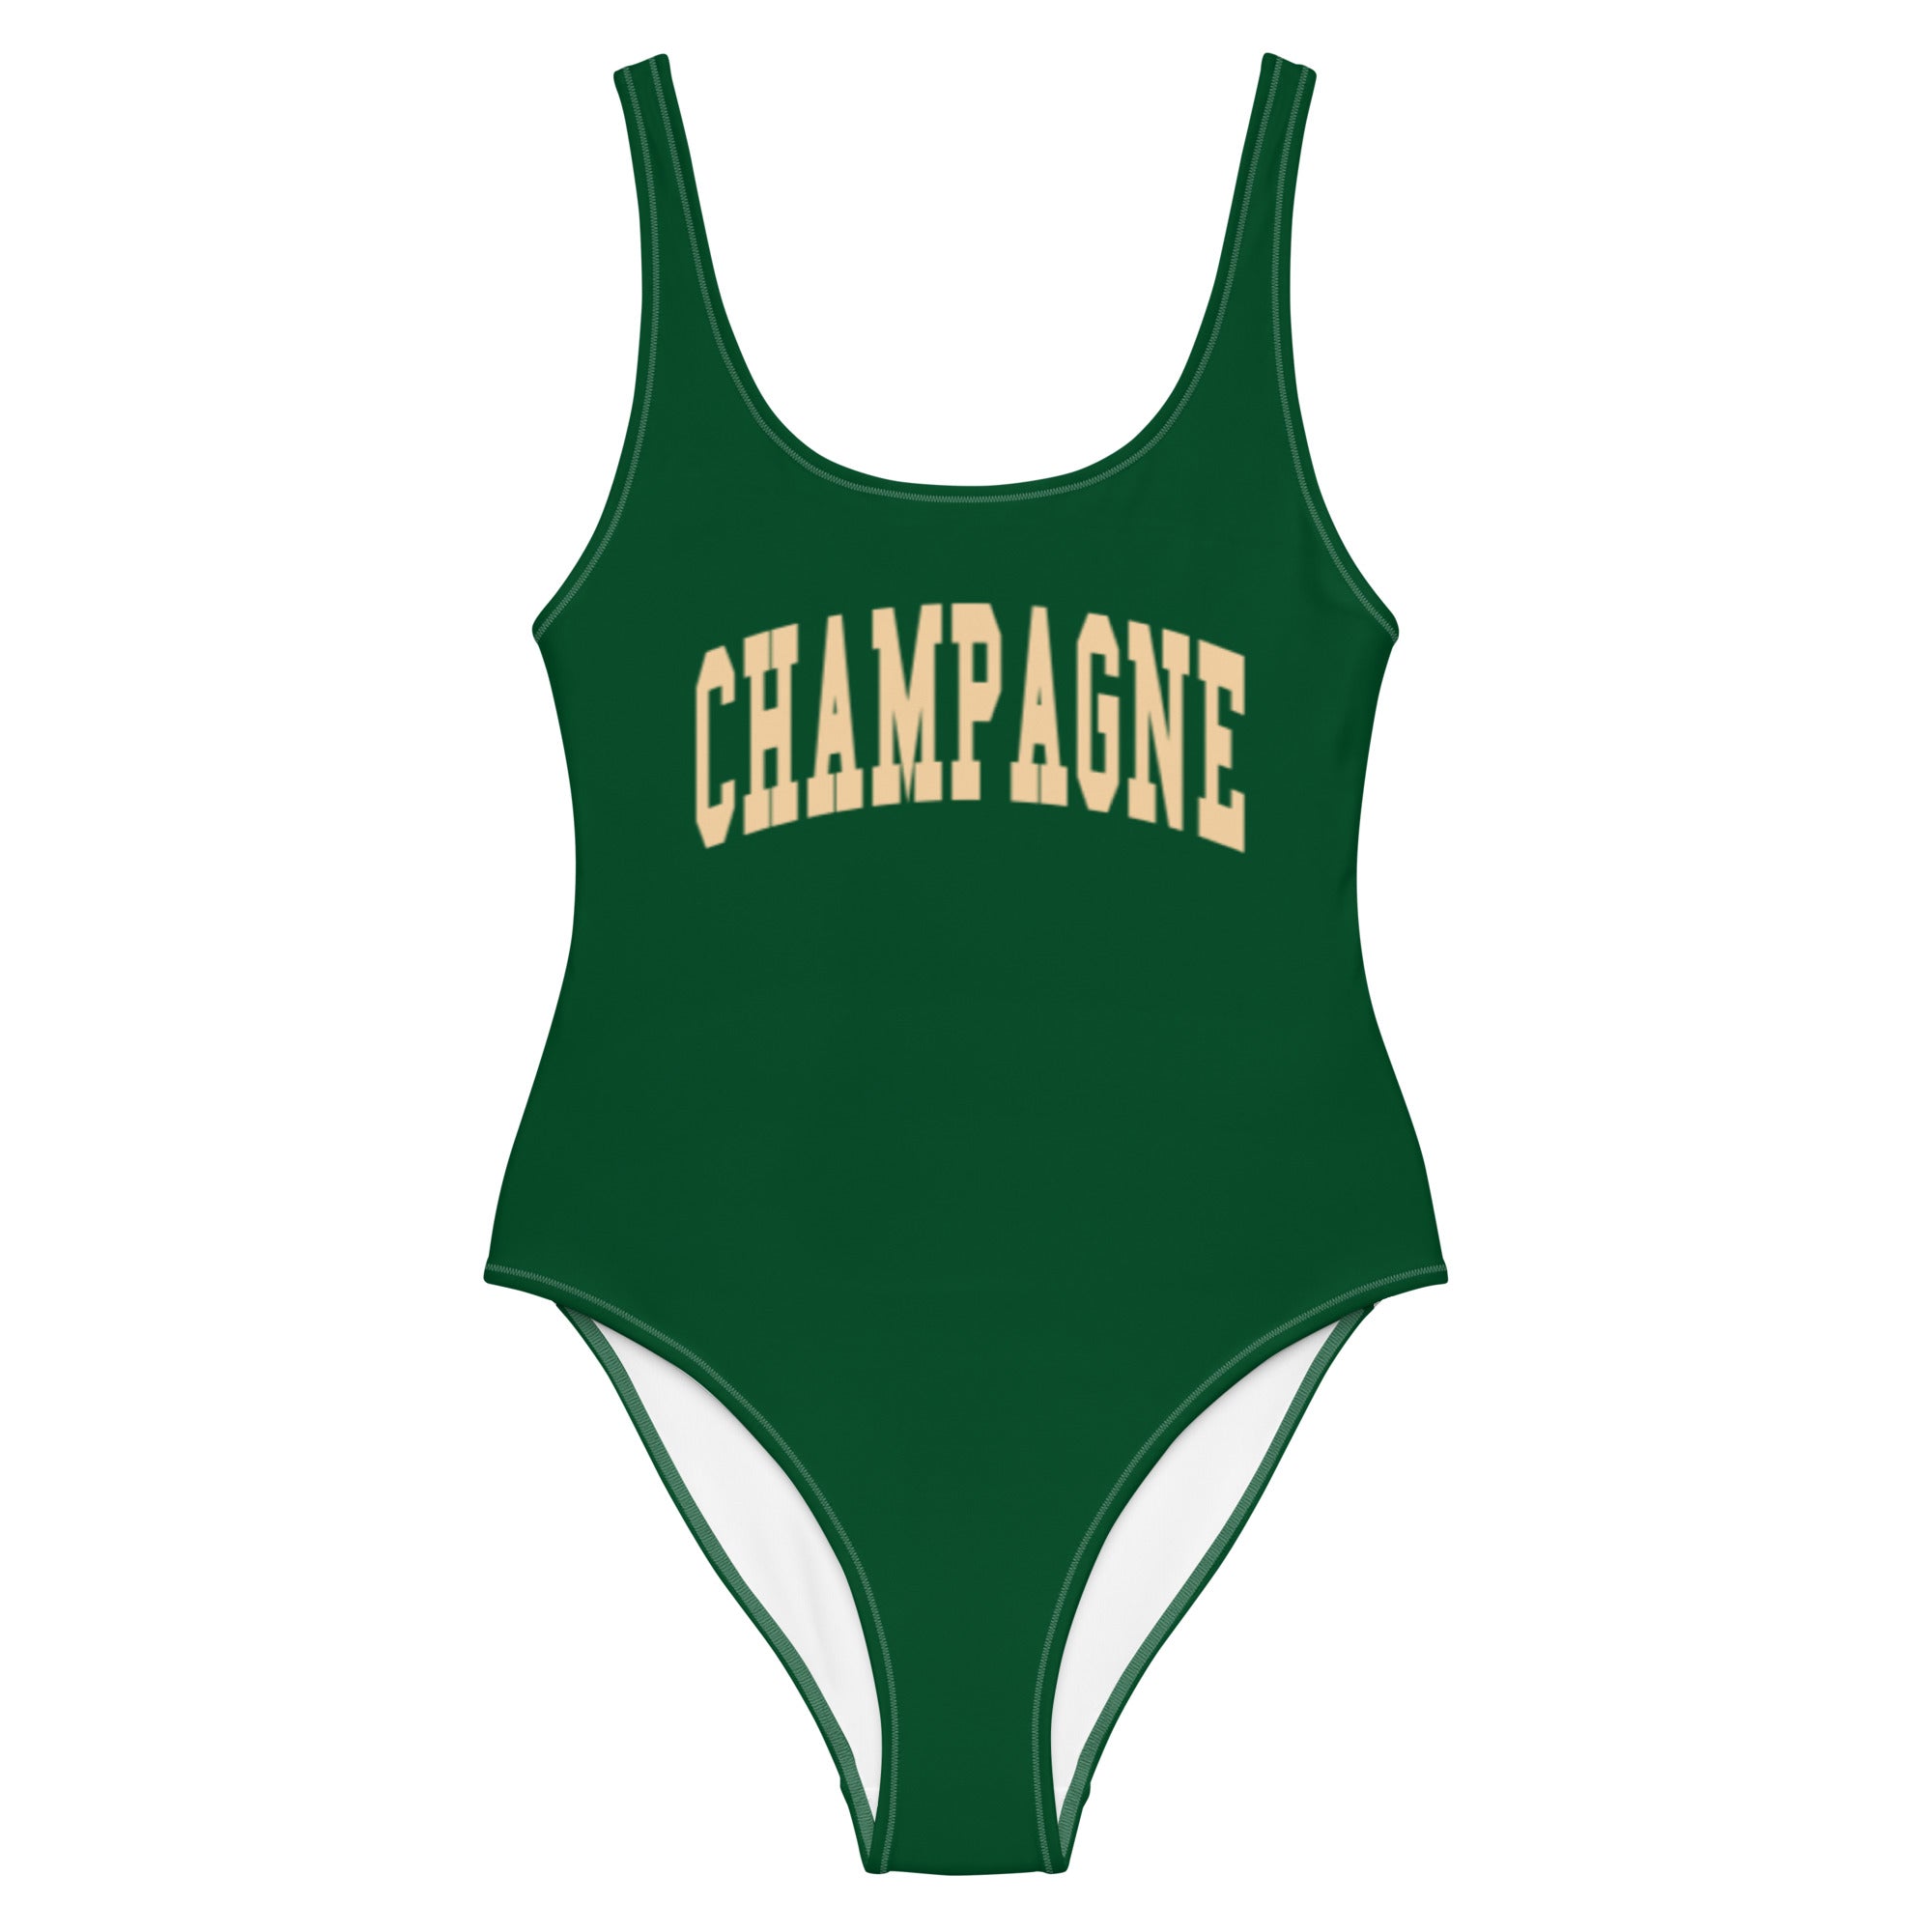 Champagne - Swimsuit - The Refined Spirit